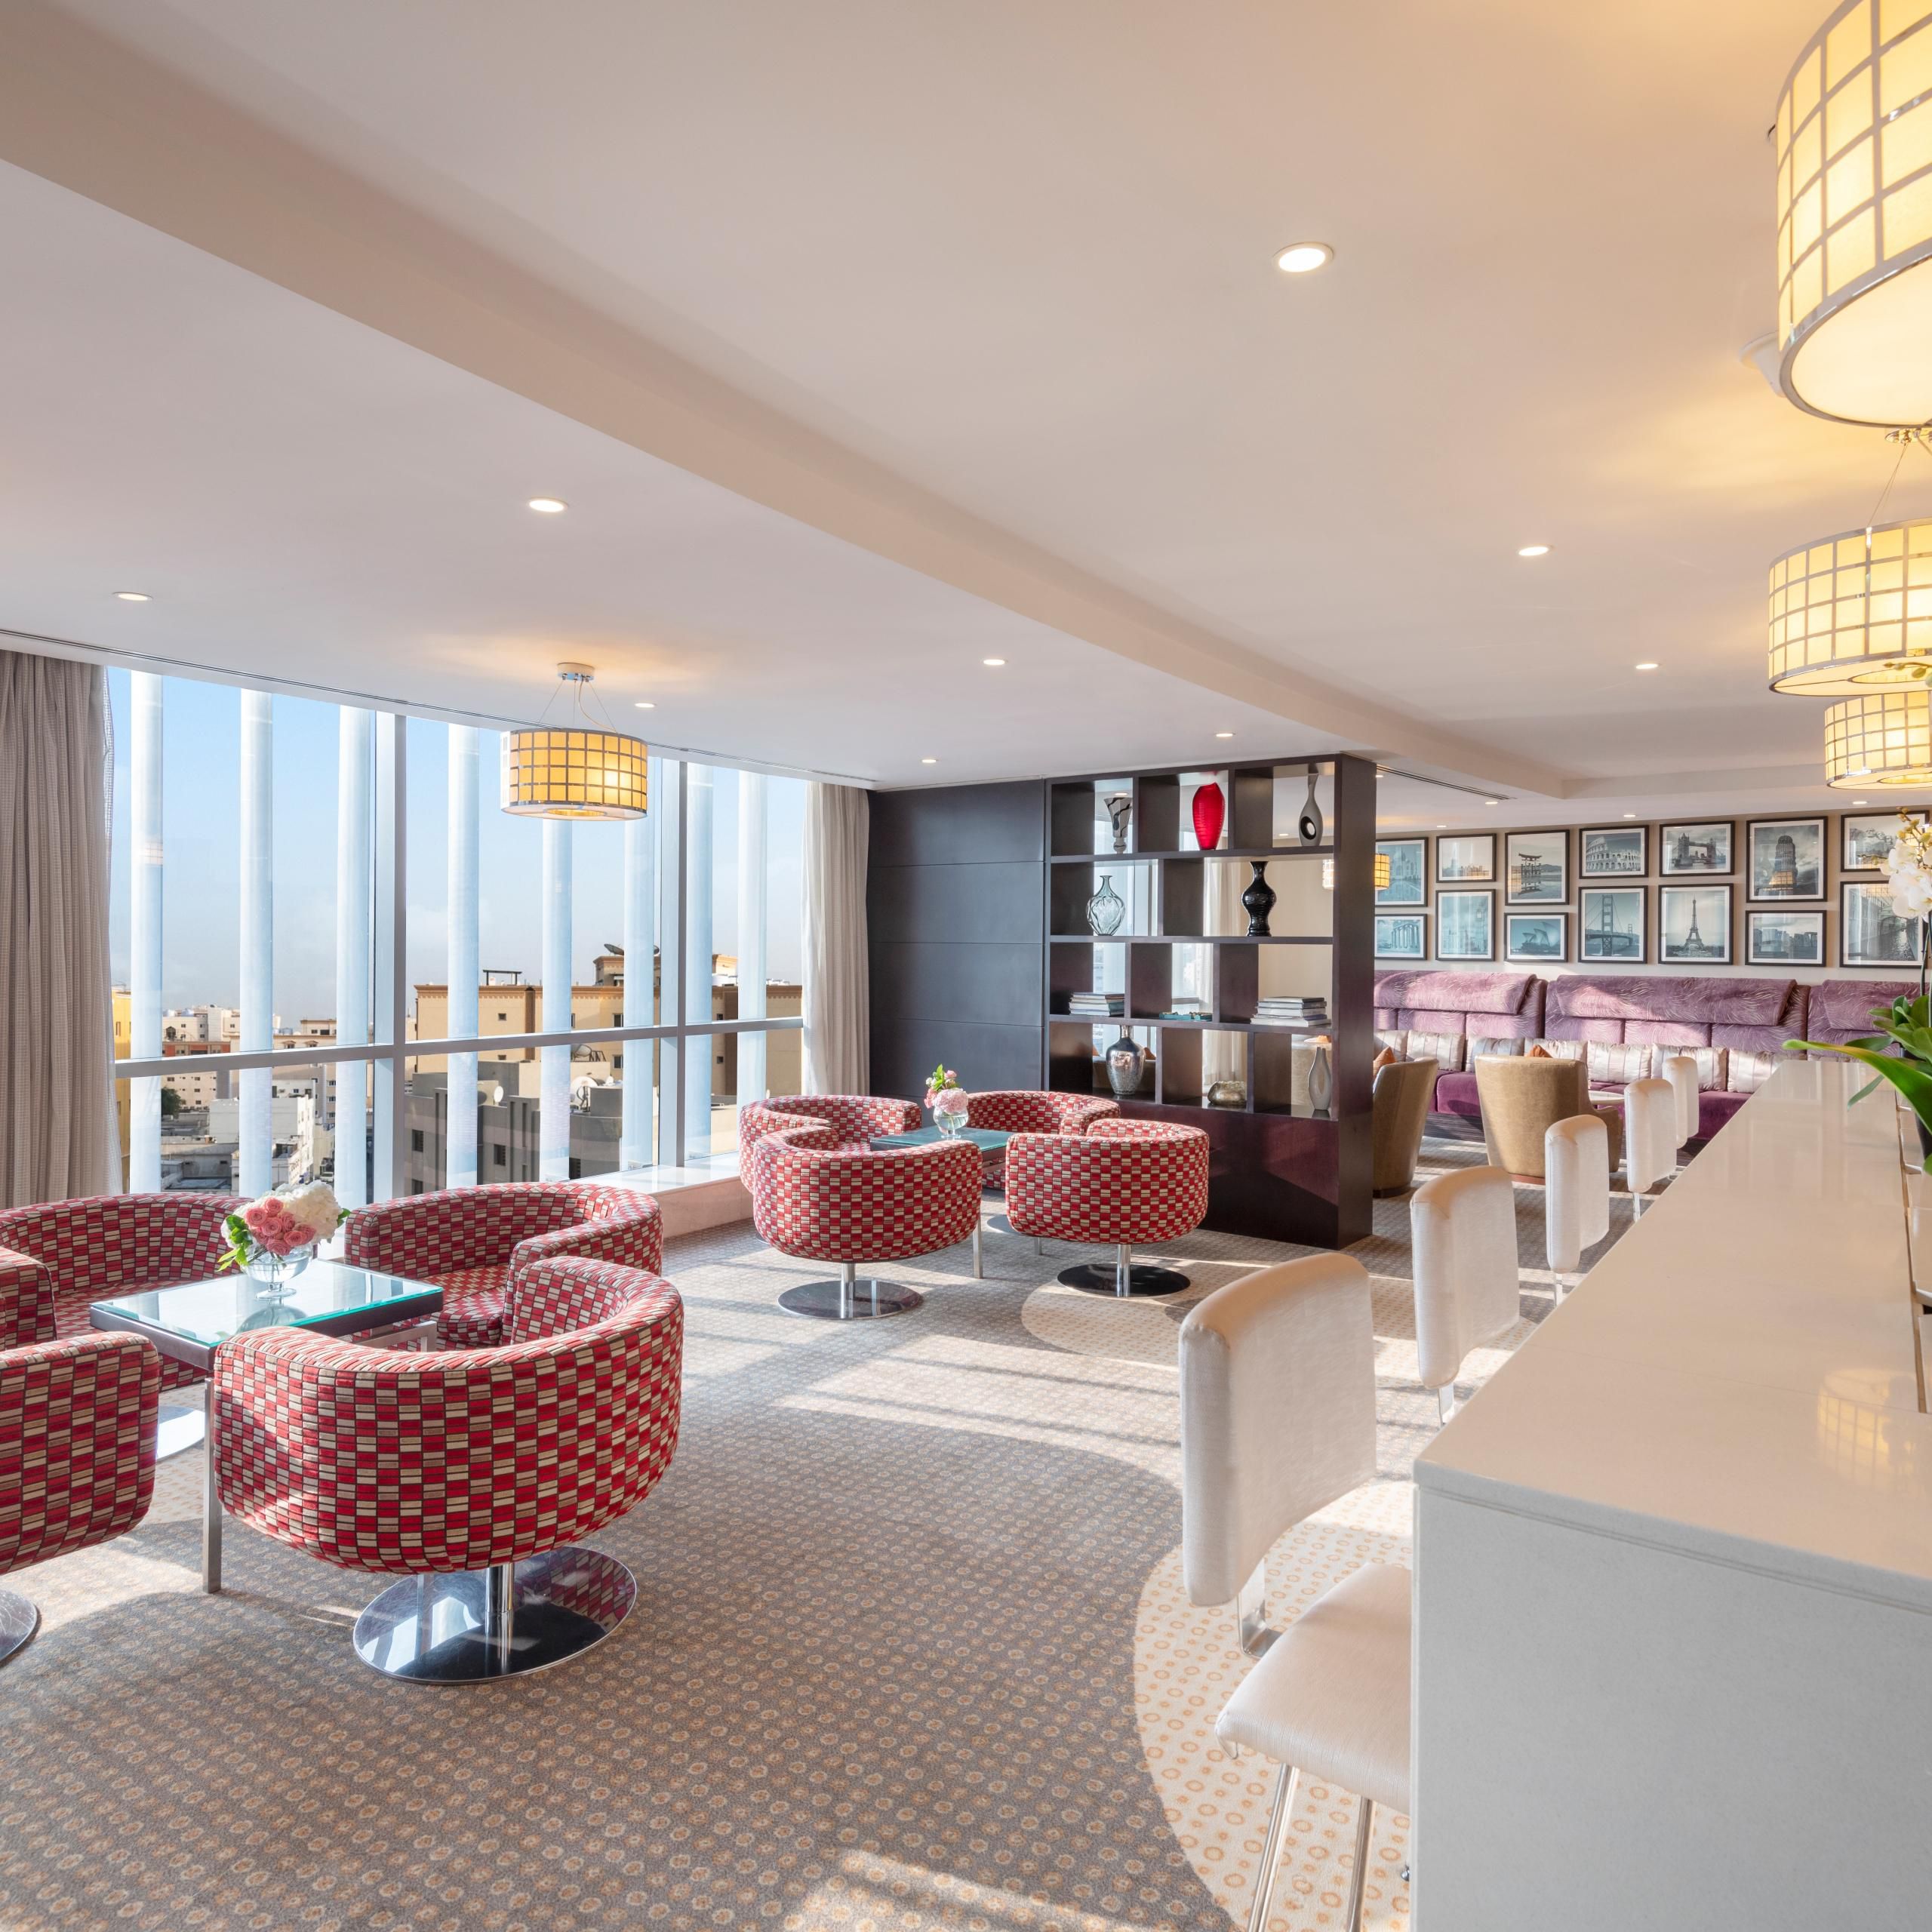 Relax, refresh or do business in style in our stylish Club Lounge